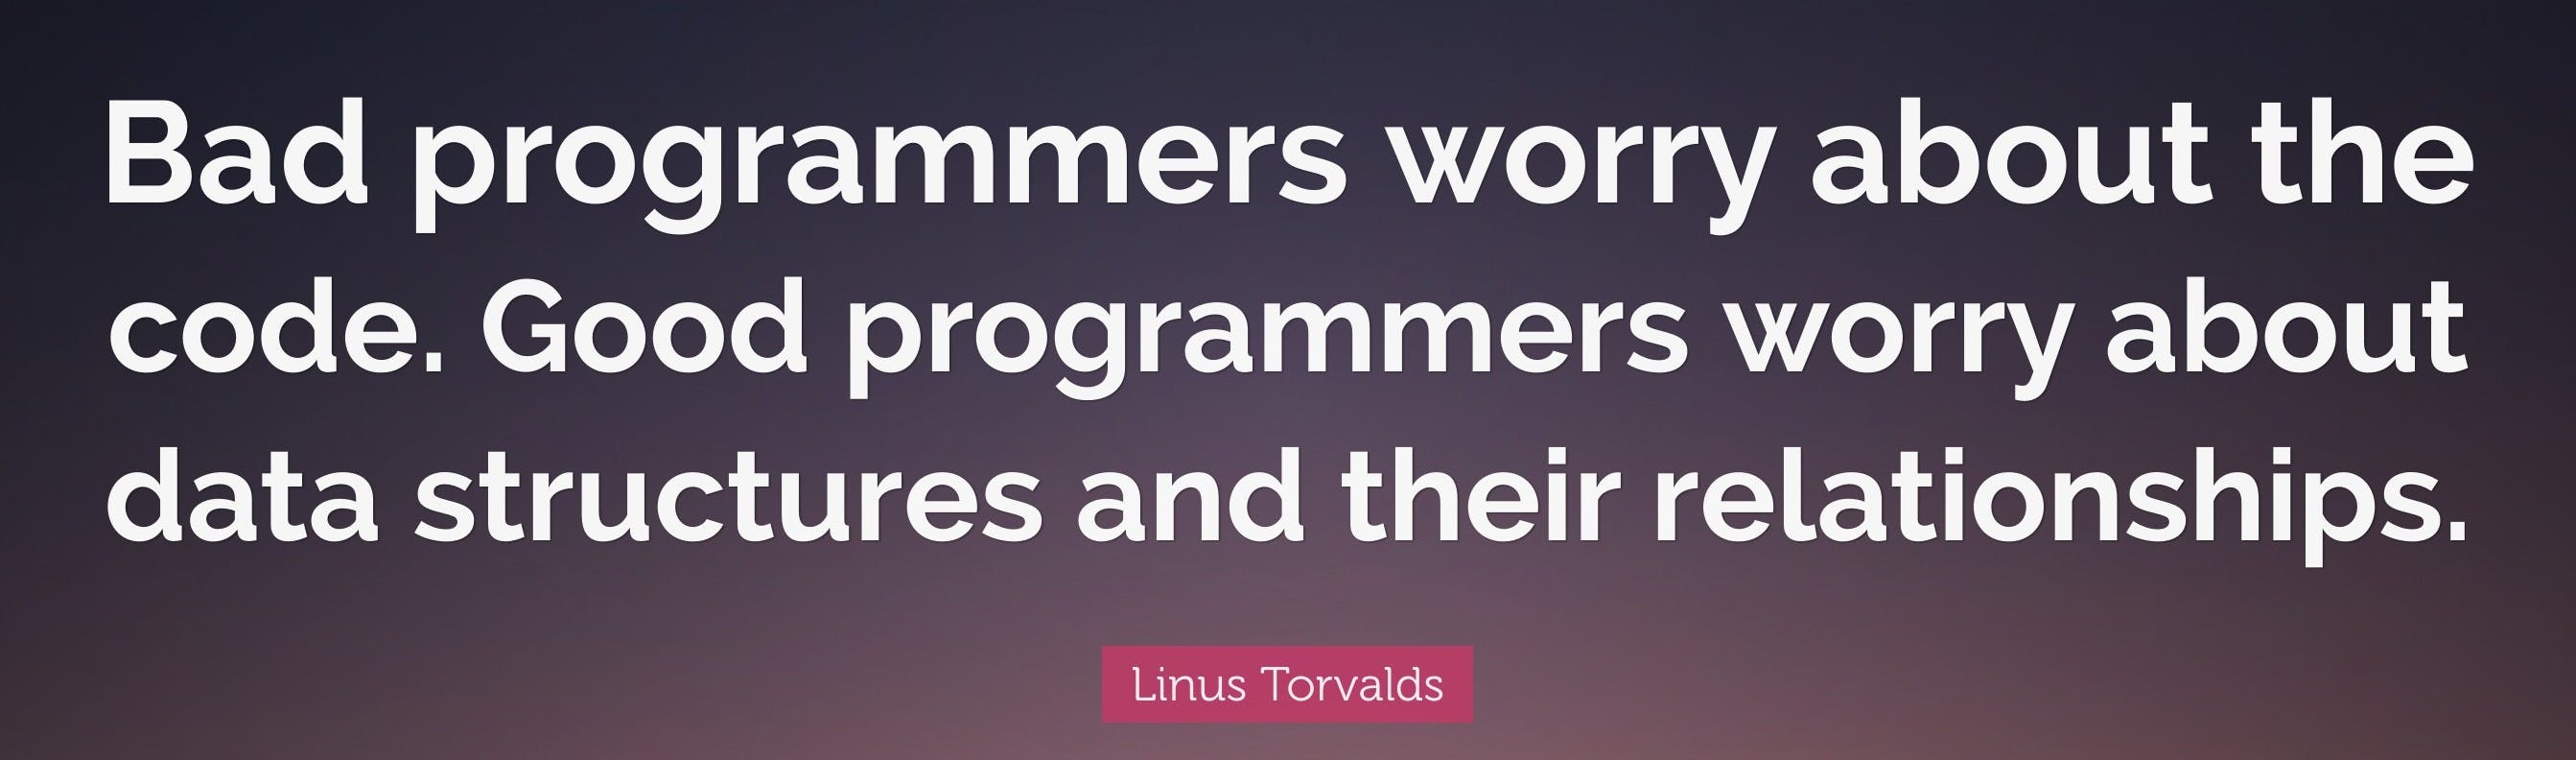 1751006-Linus-Torvalds-Quote-Bad-programmers-worry-about-the-code-Good.jpg